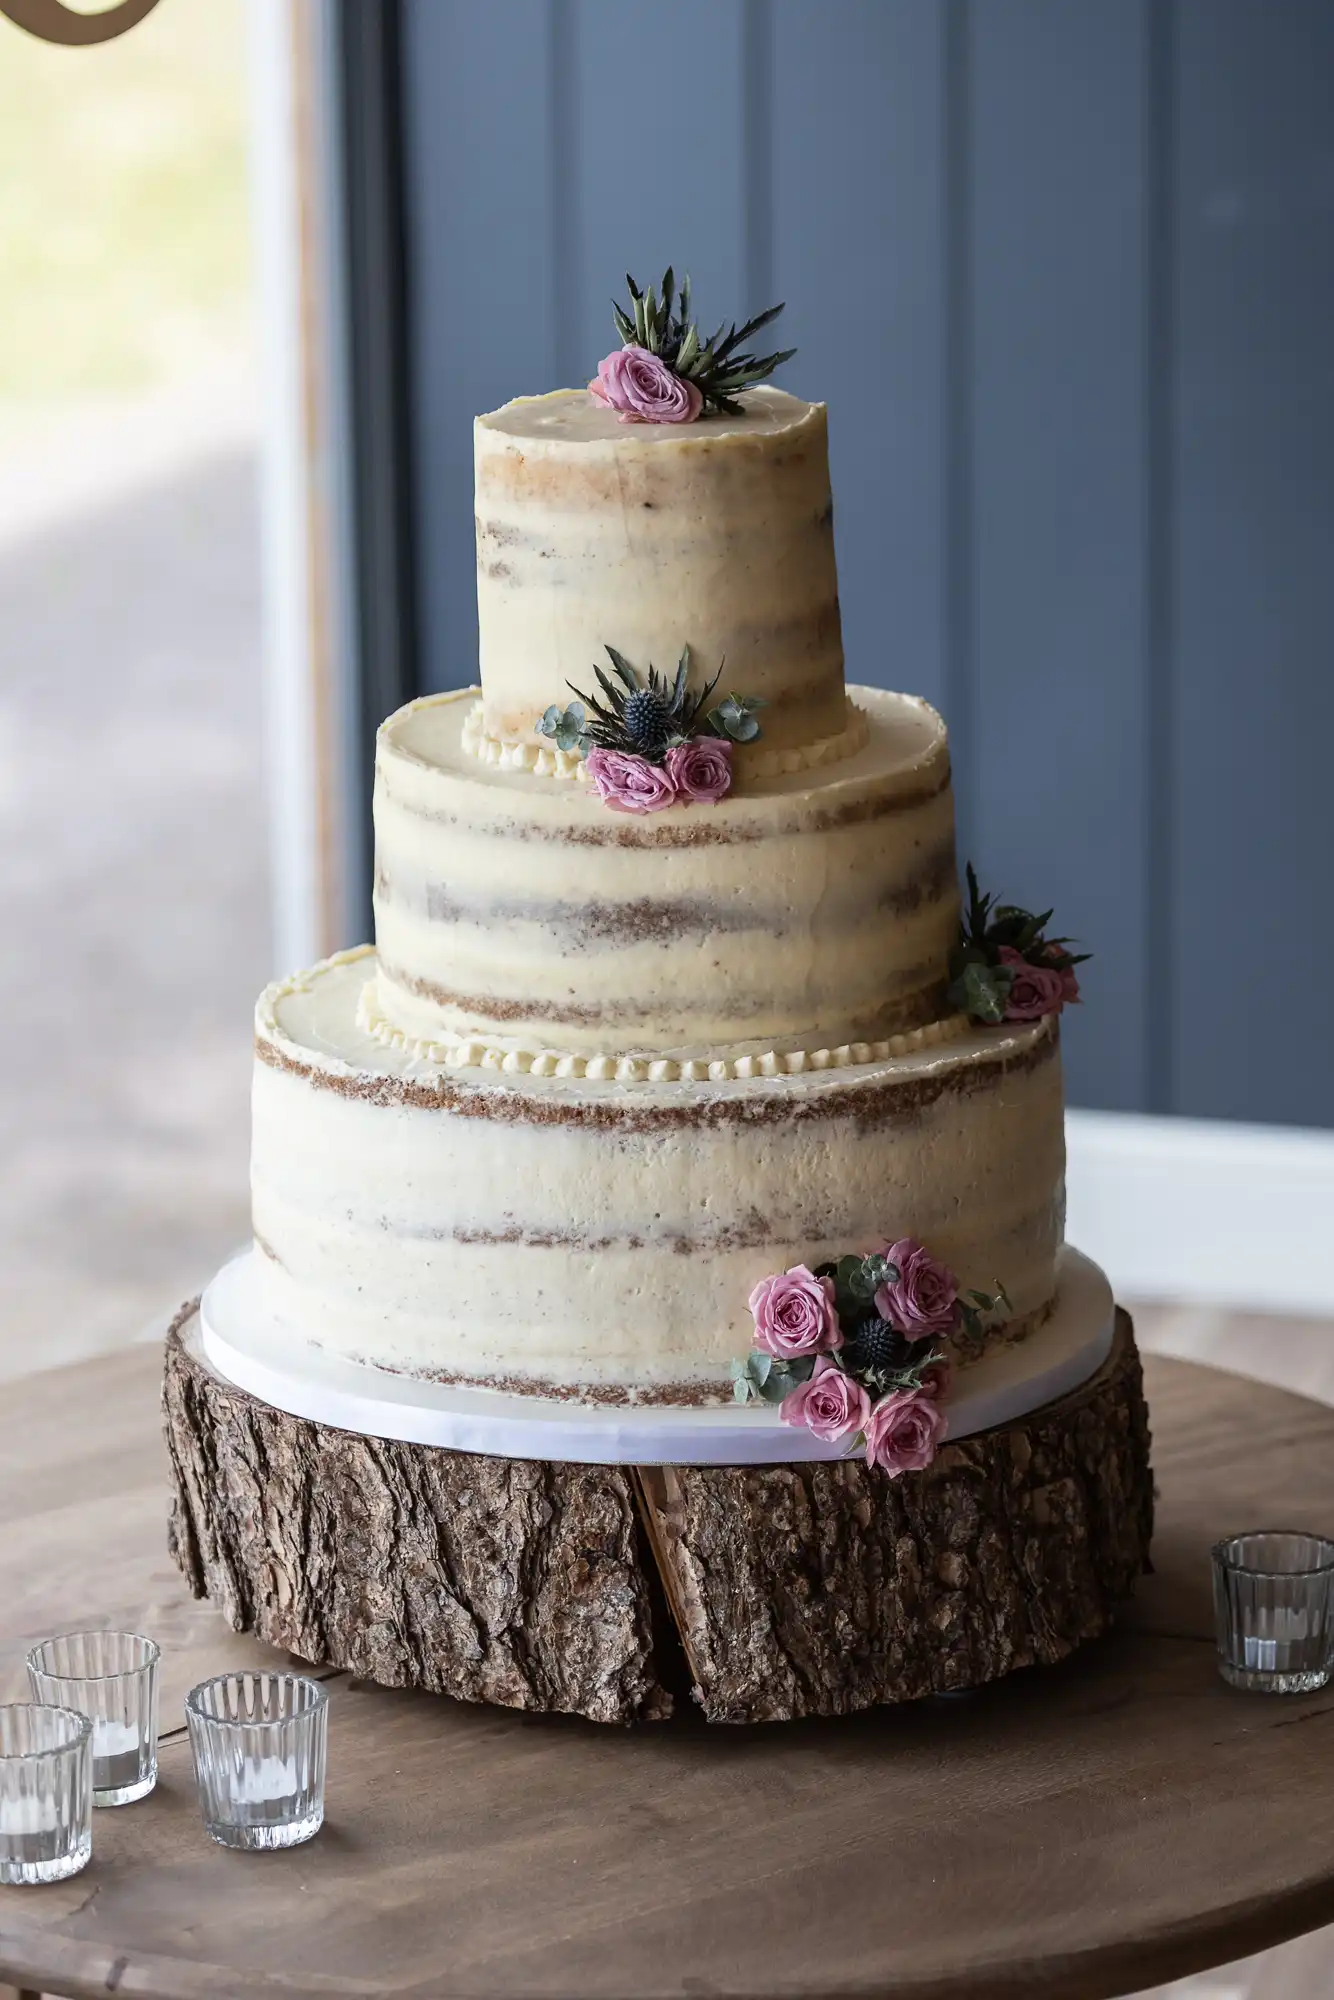 Three-tiered wedding cake with white icing and pink floral decorations on a wooden stand, placed next to clear glasses on a table.